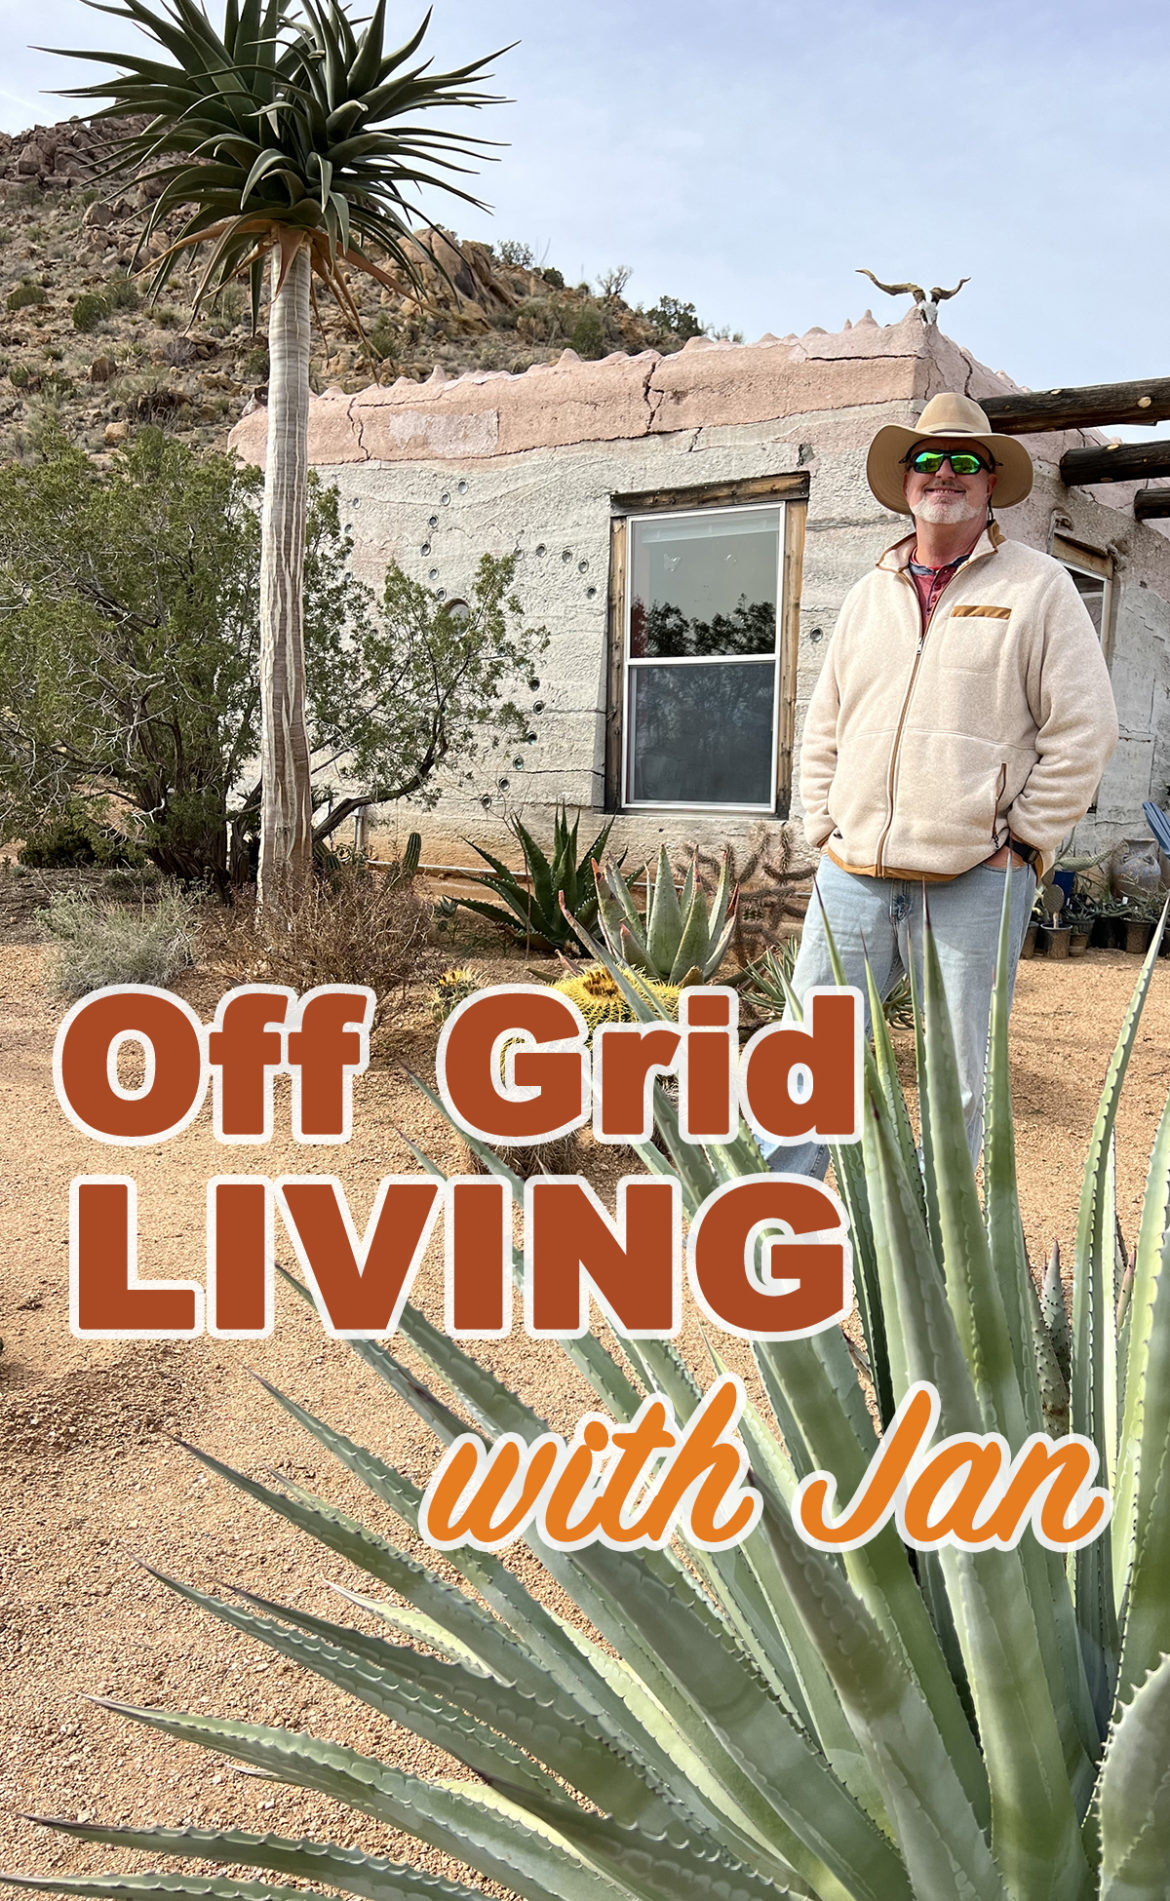 An Off the Grid and Eco Friendly Hideaway! Meet Jan Emming